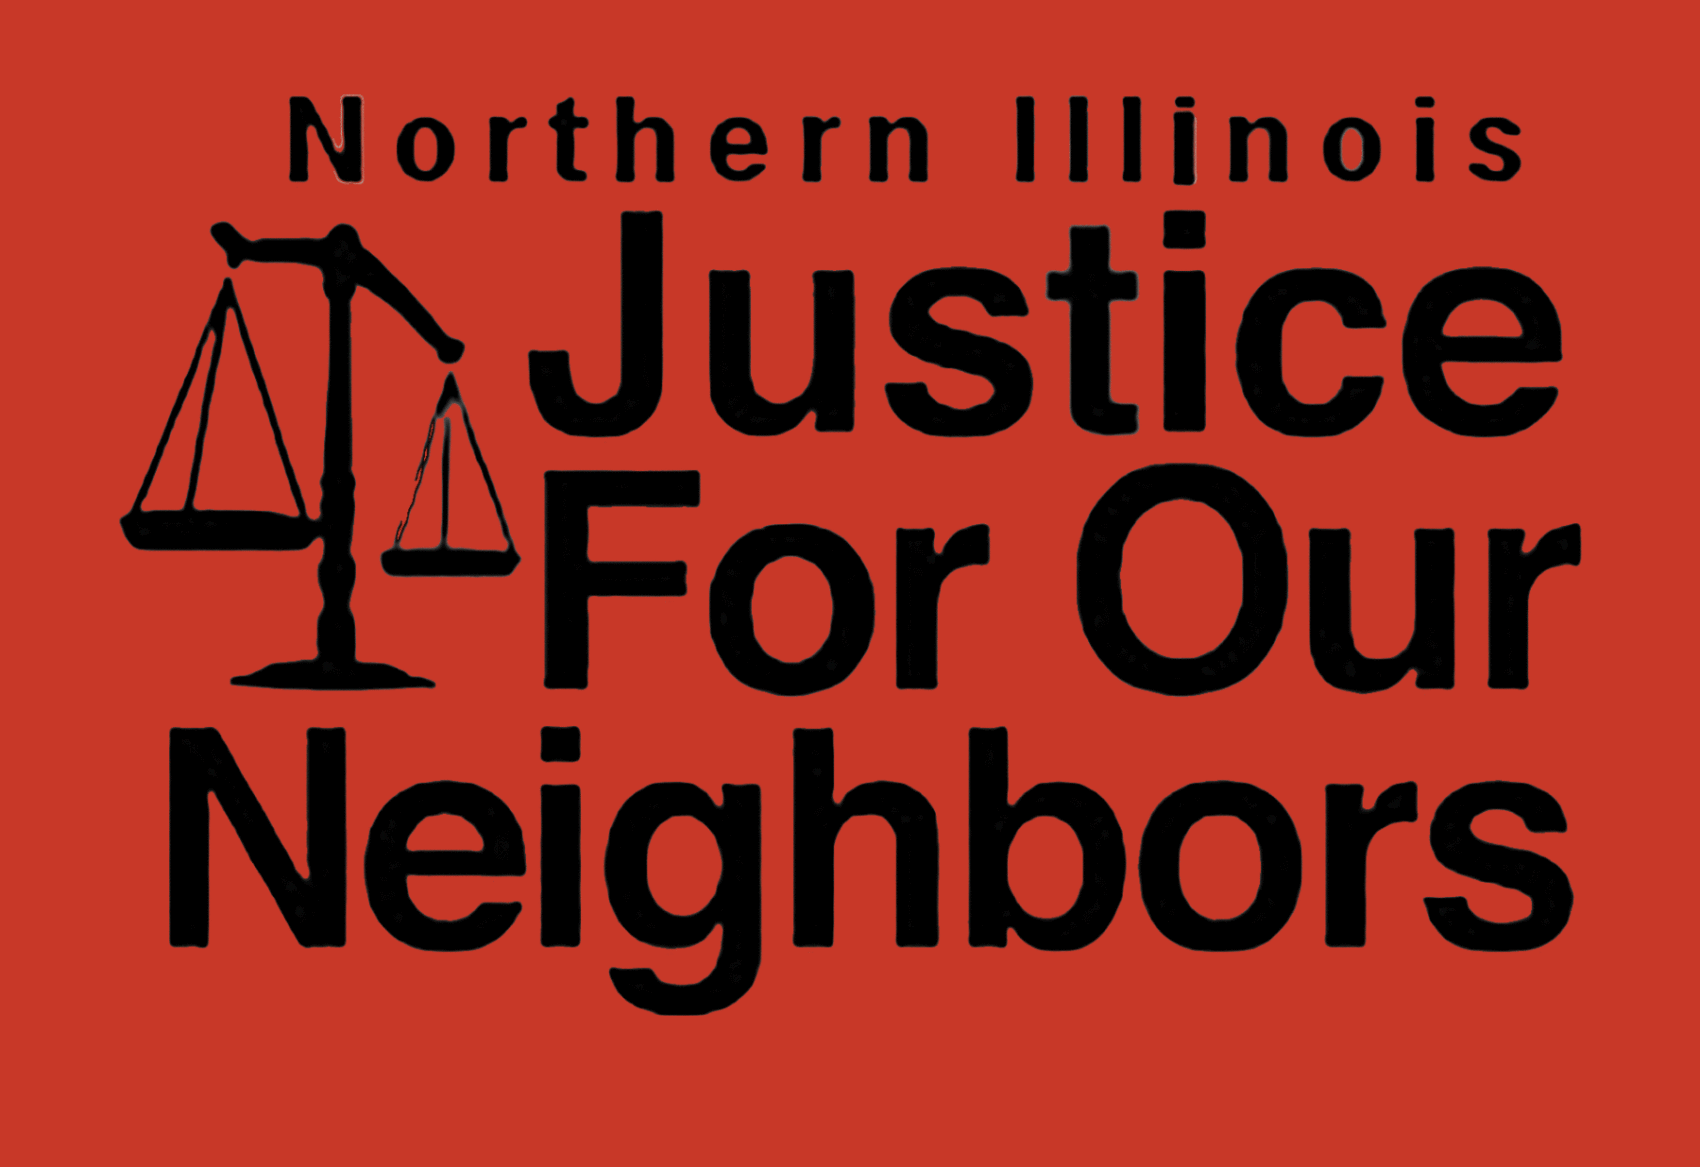 Northern Illinois Justice for Our Neighbors